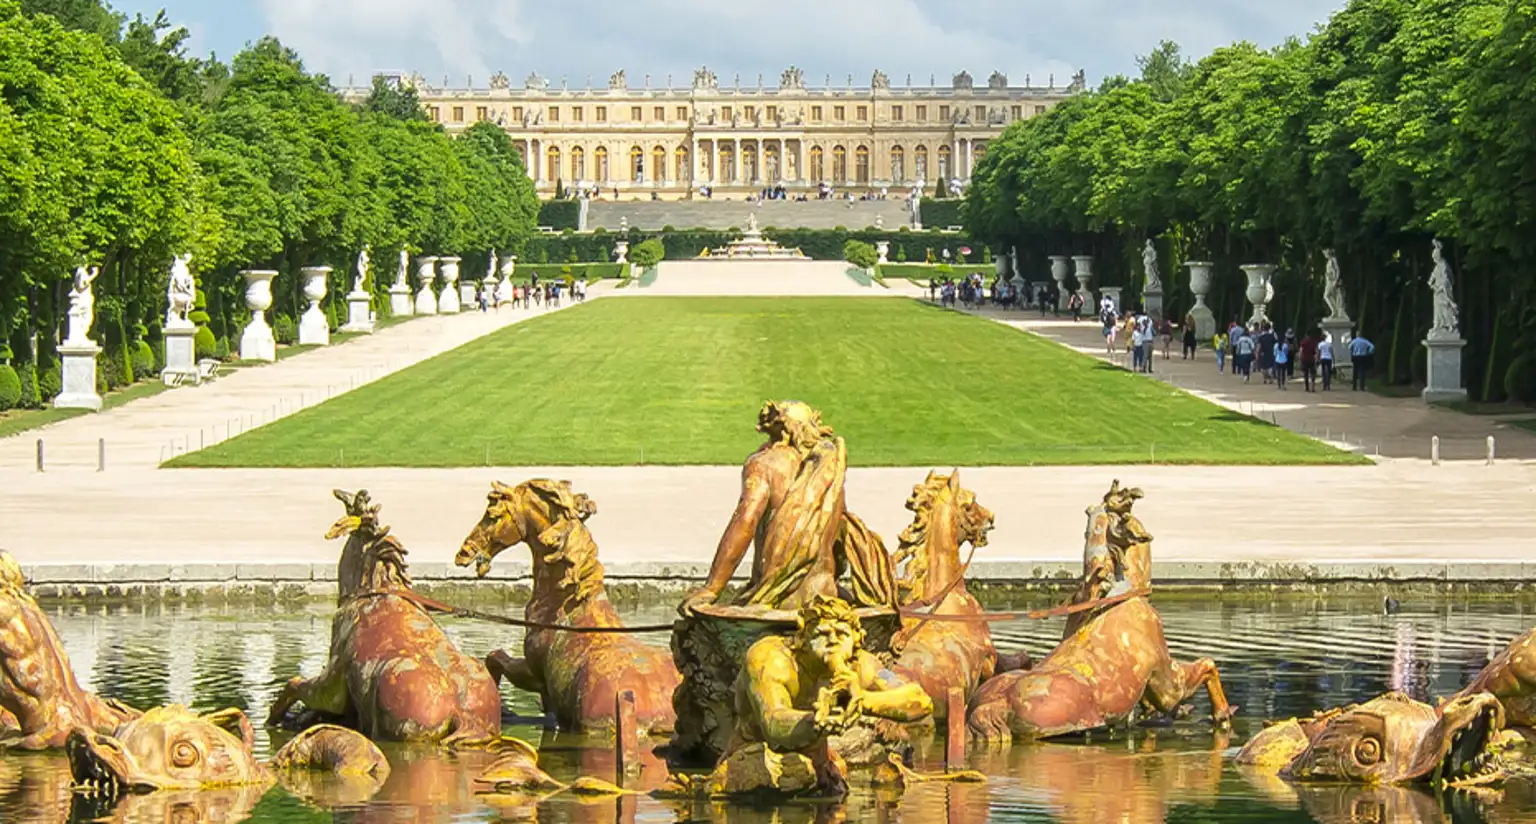 Explore Versailles and its renowned palace